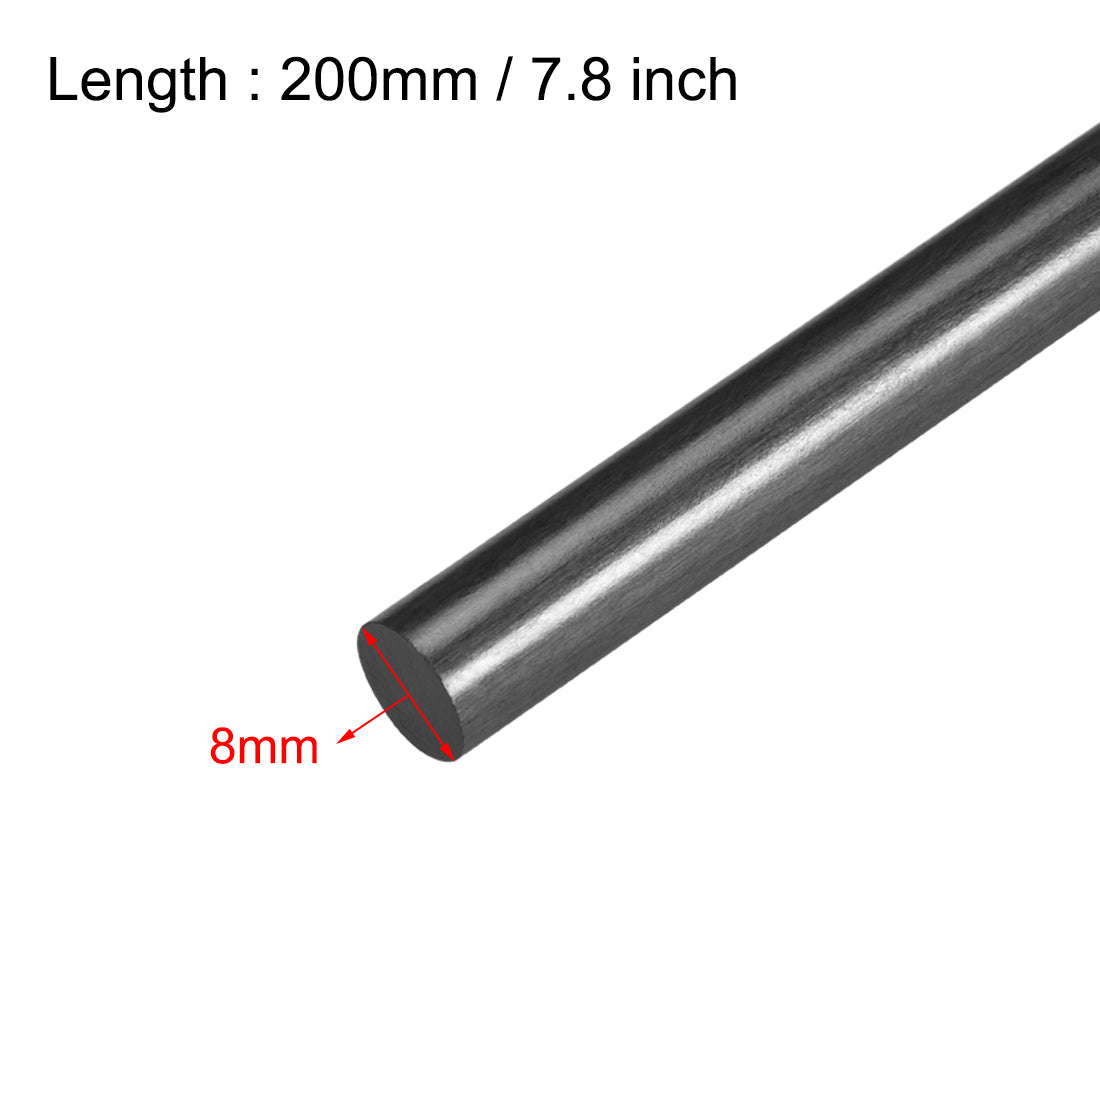 Uxcell Uxcell 12mm Carbon Fiber Rod For RC Airplane Matte Pole US, 200mm 7.8 inch